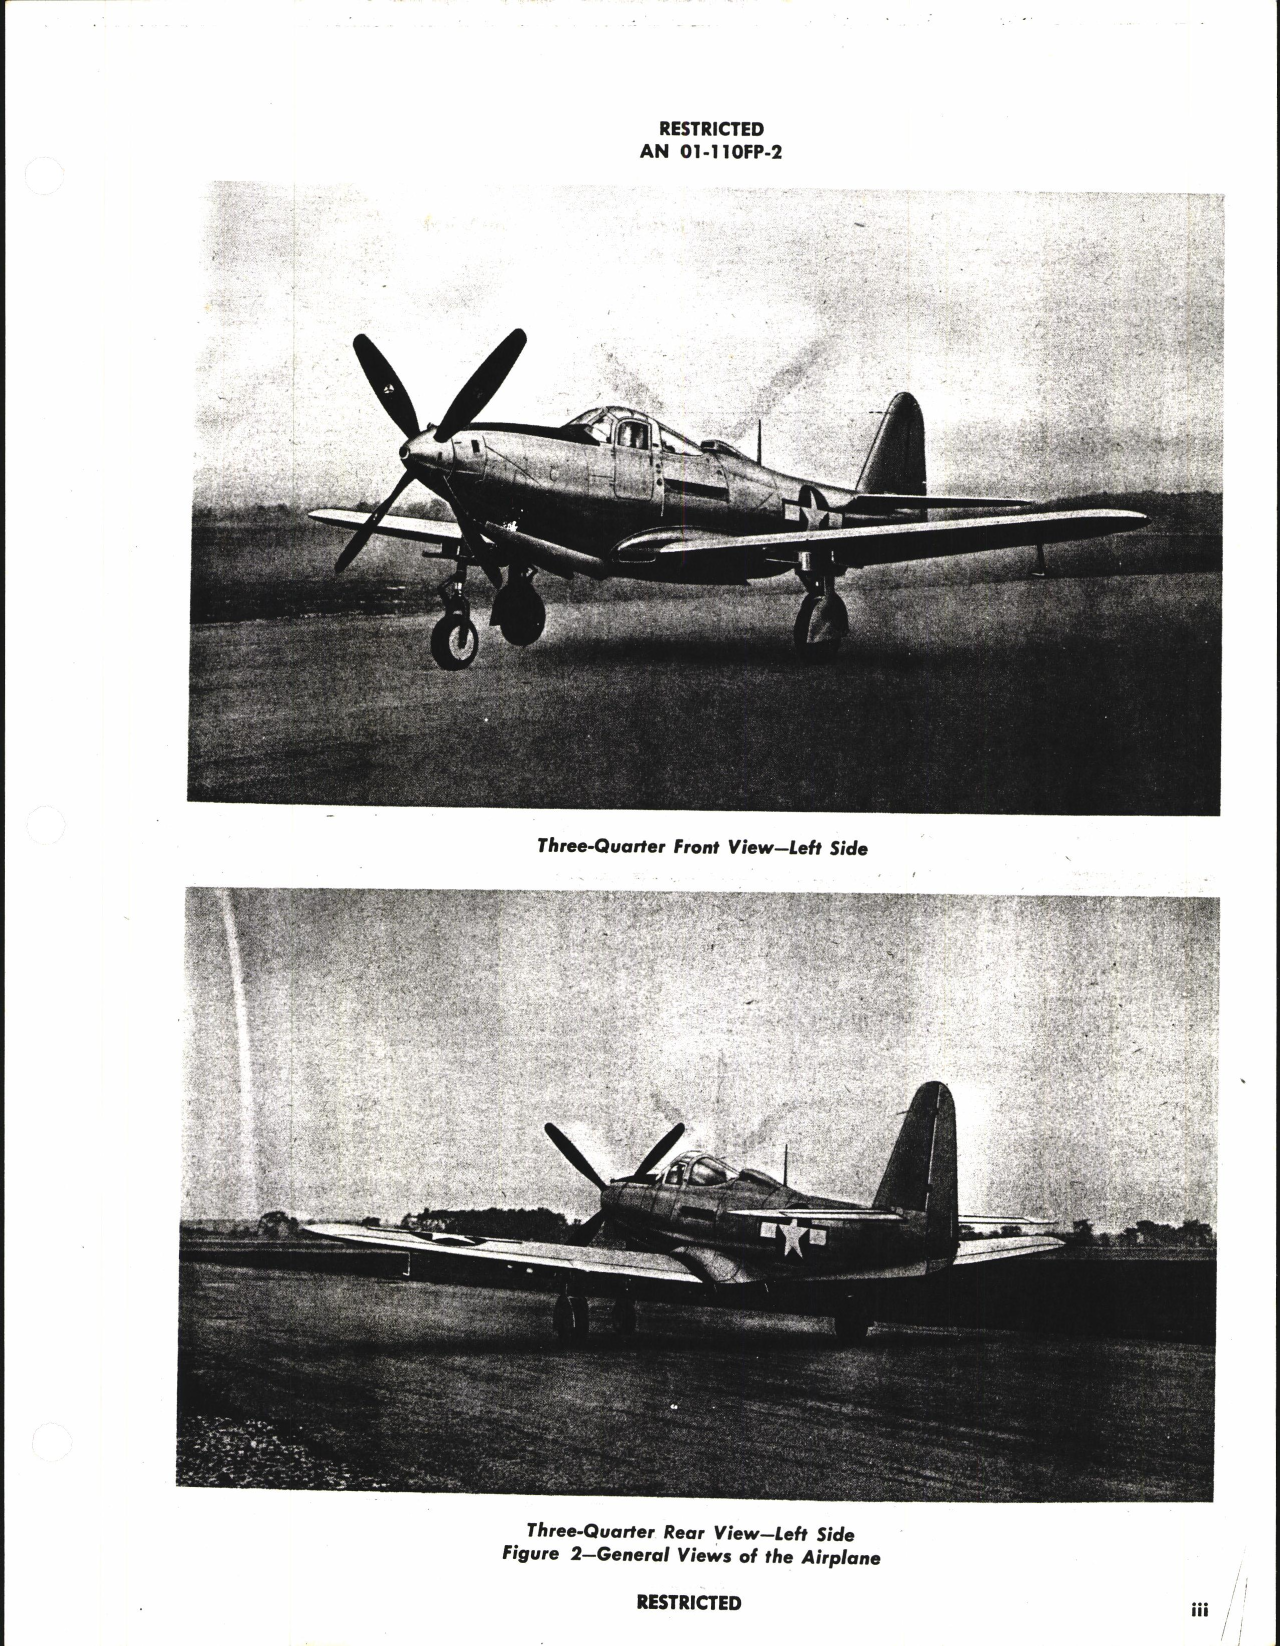 Sample page 5 from AirCorps Library document: Erection and Maintenance Instructions for Army Models P-63A and P-63C